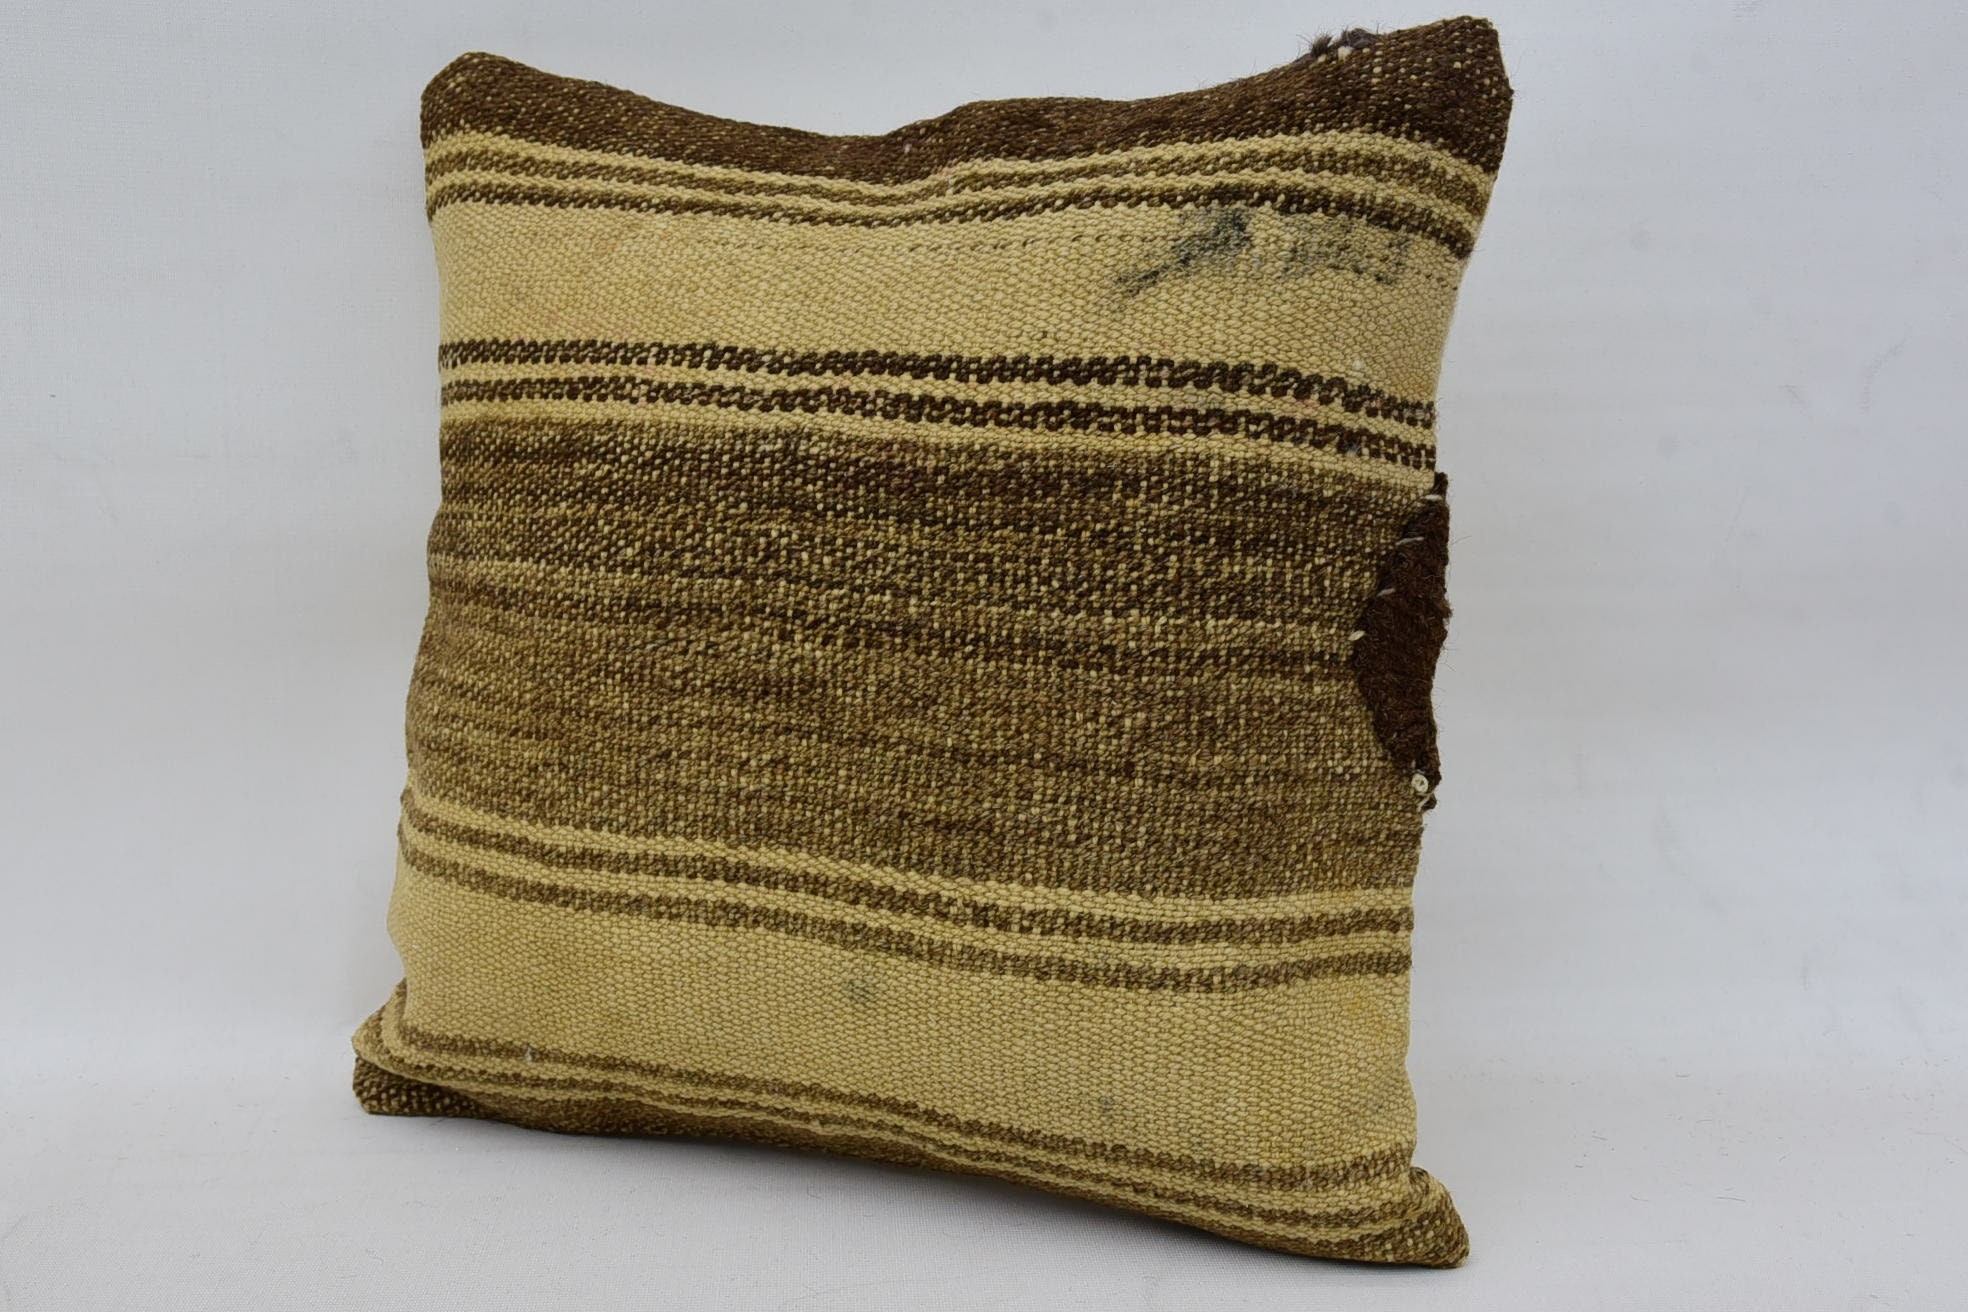 Pillow for Couch, 14"x14" Brown Pillow, Vintage Kilim Throw Pillow, Outdoor Patio Cushion Case, Authentic Pillow, Antique Pillows